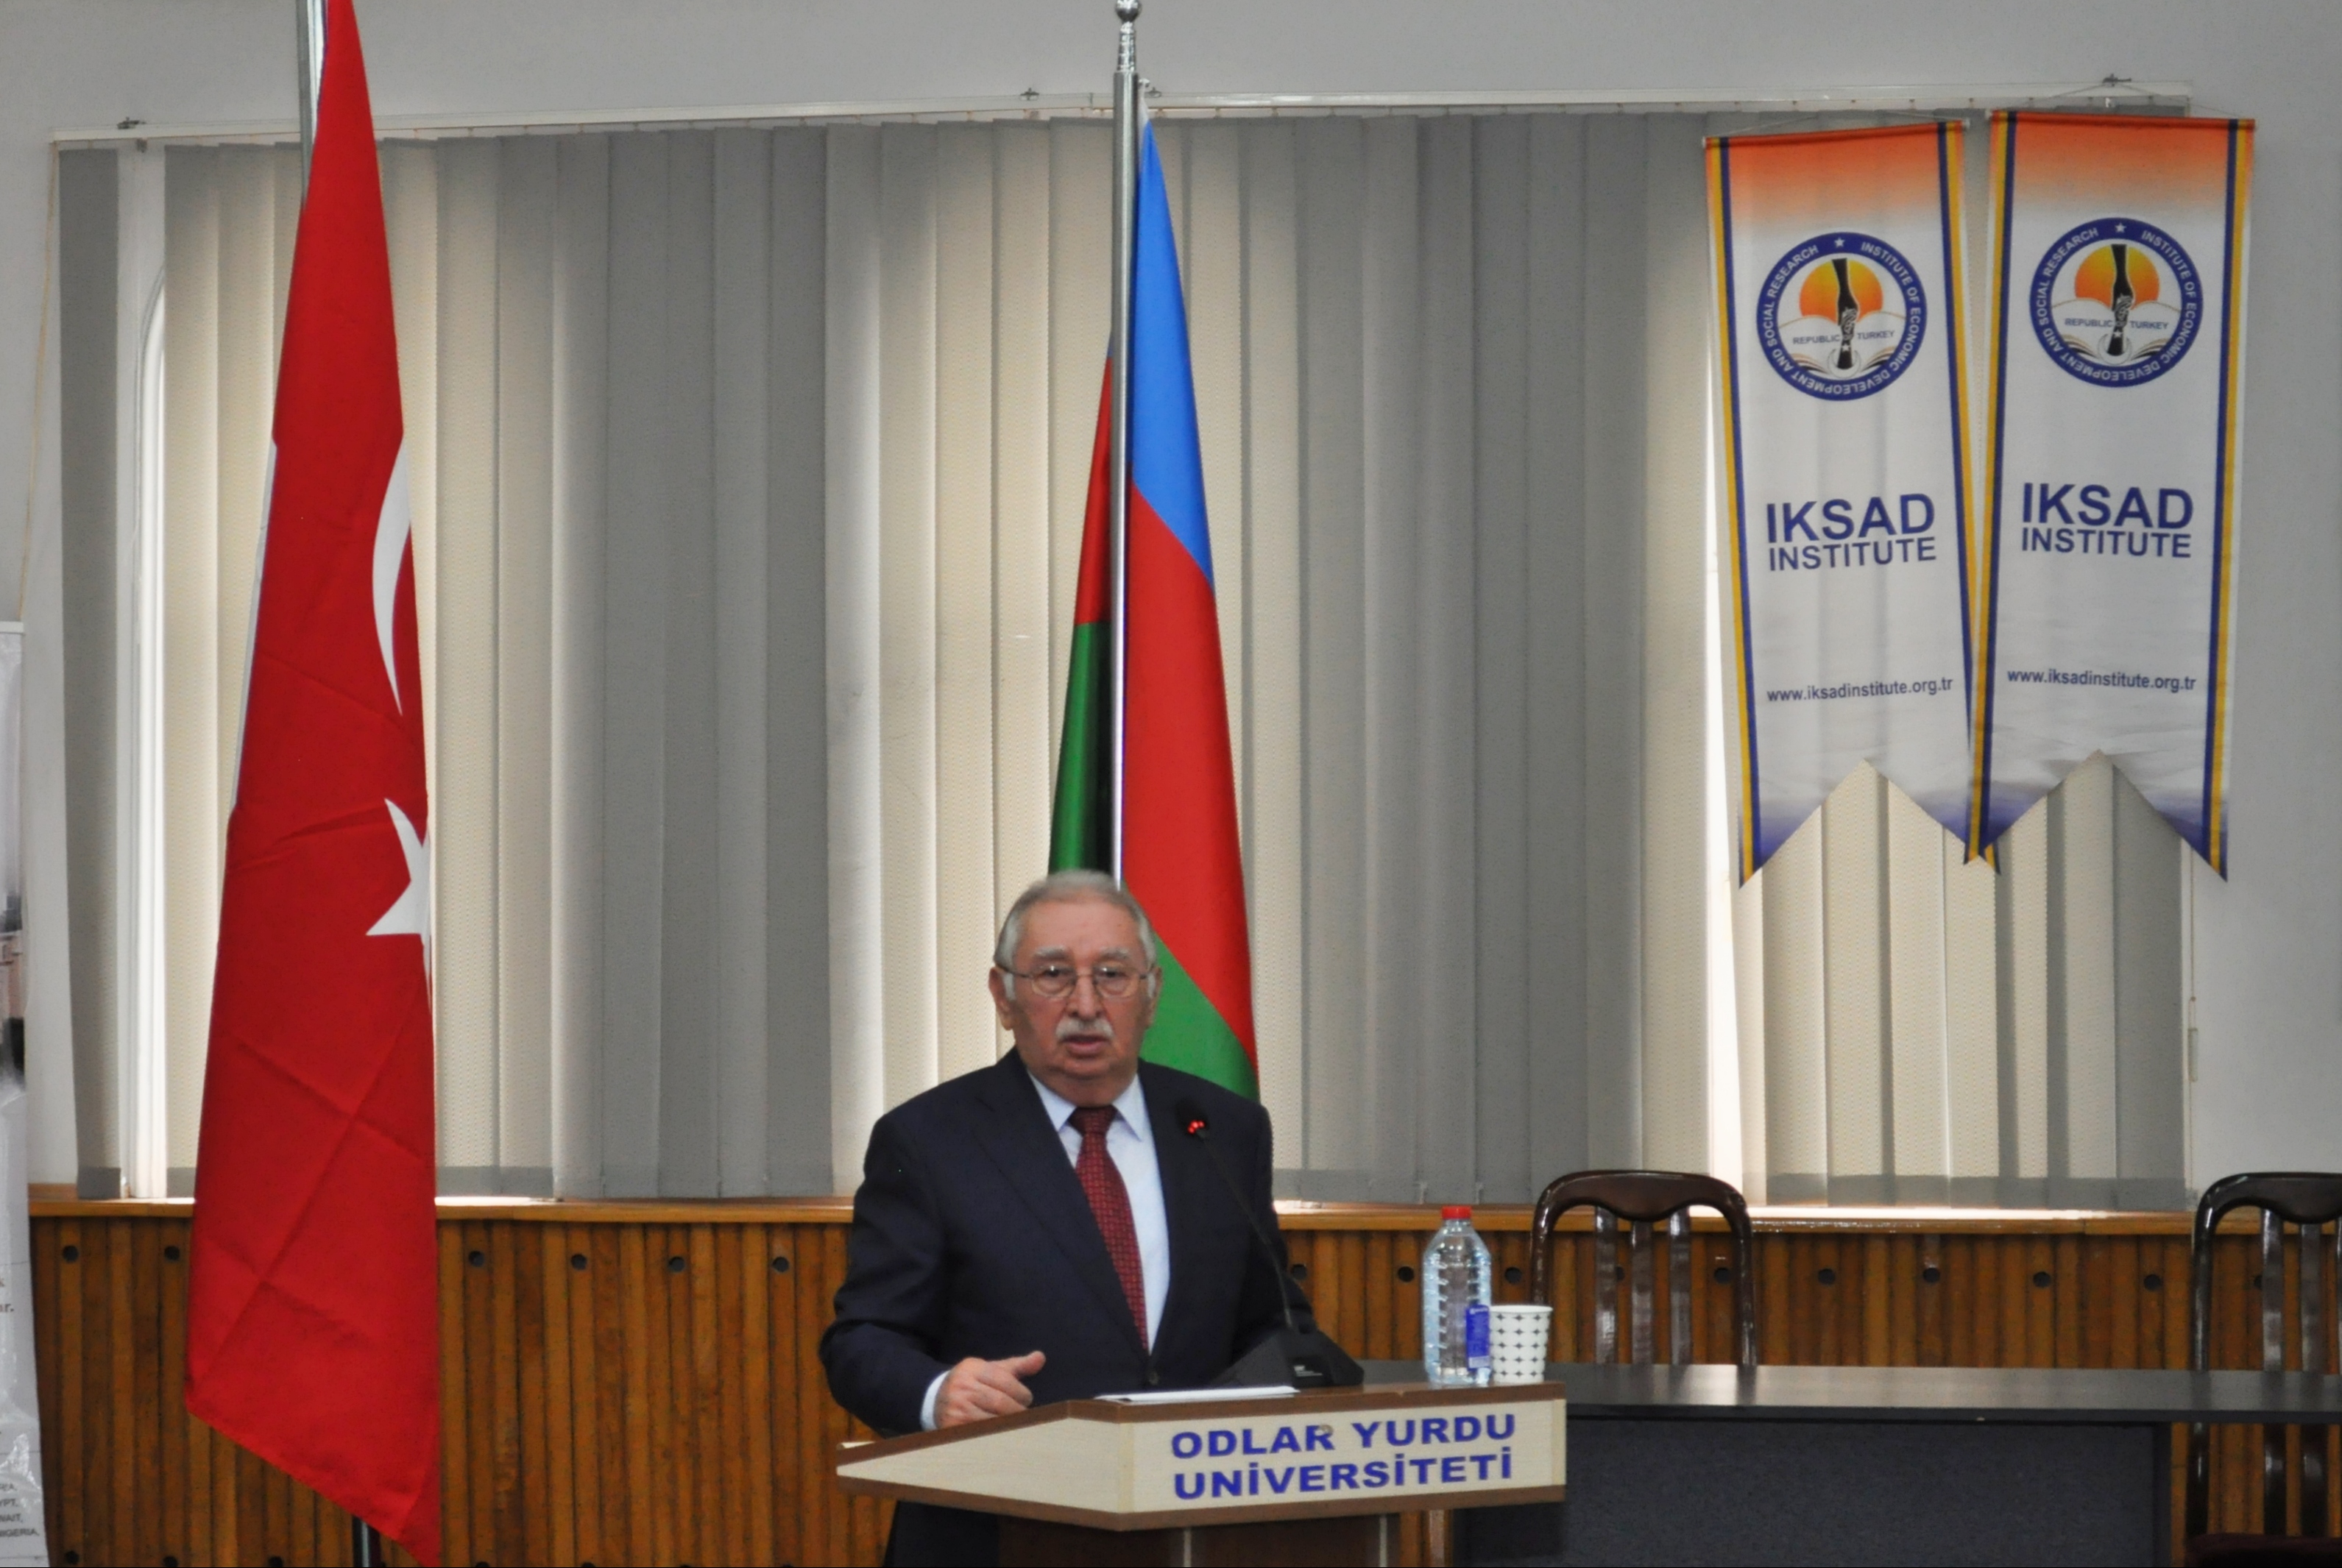 The opening ceremony of the 4th International Baku Scientific Research Conference was held at OYU